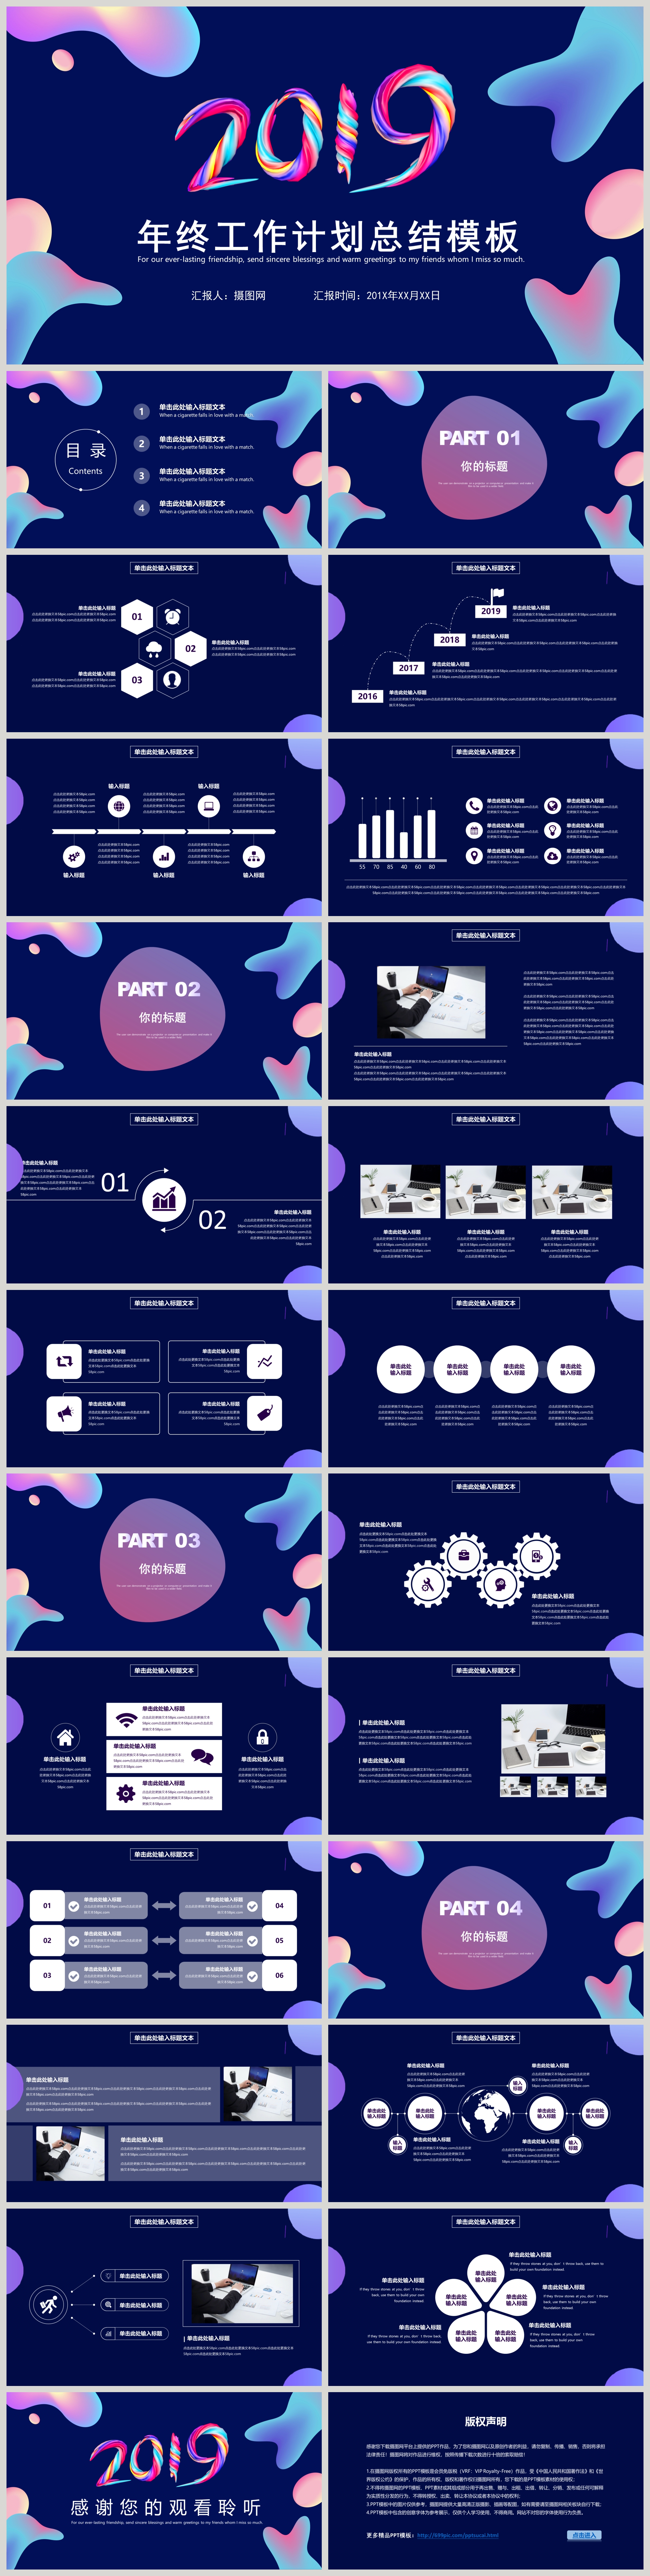 marketing-plan-ppt-template-download-presentations-template